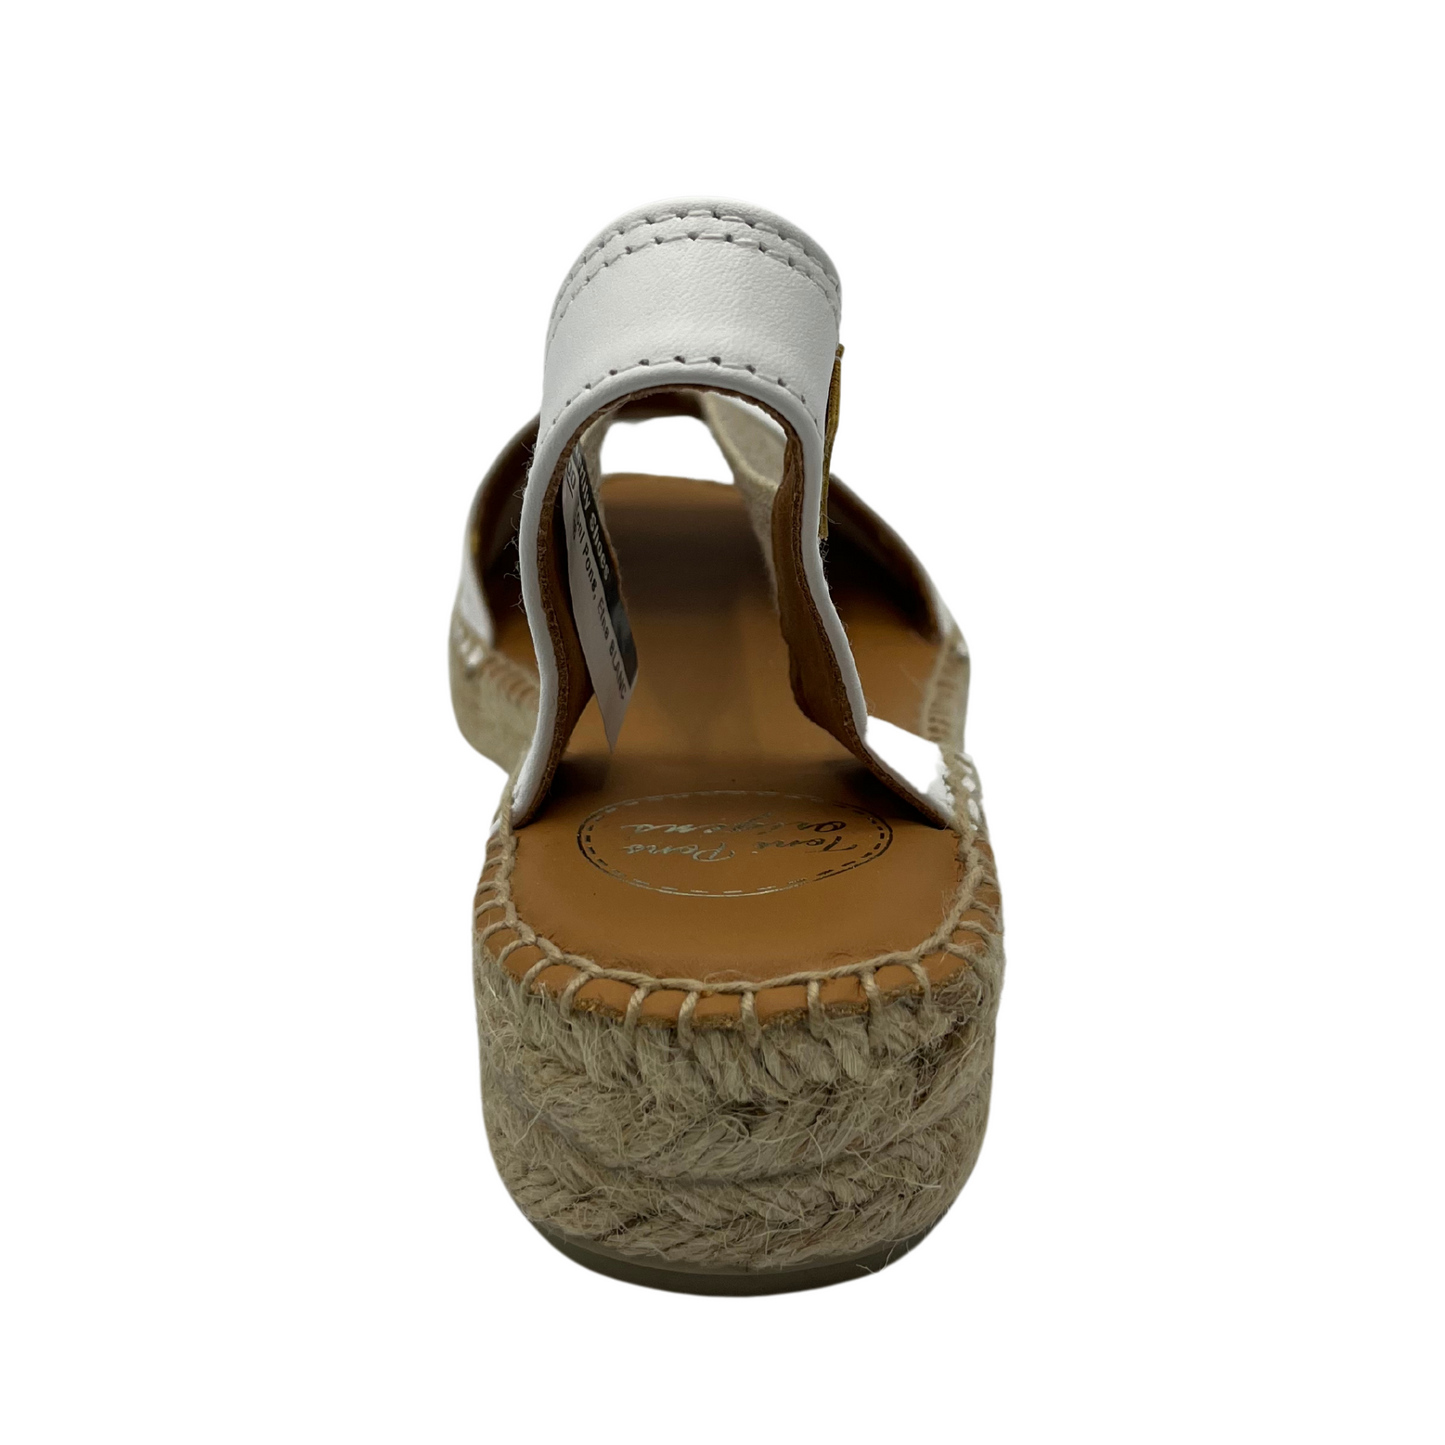 Back view of white leather sandal with brown inner lining and short wedge heel